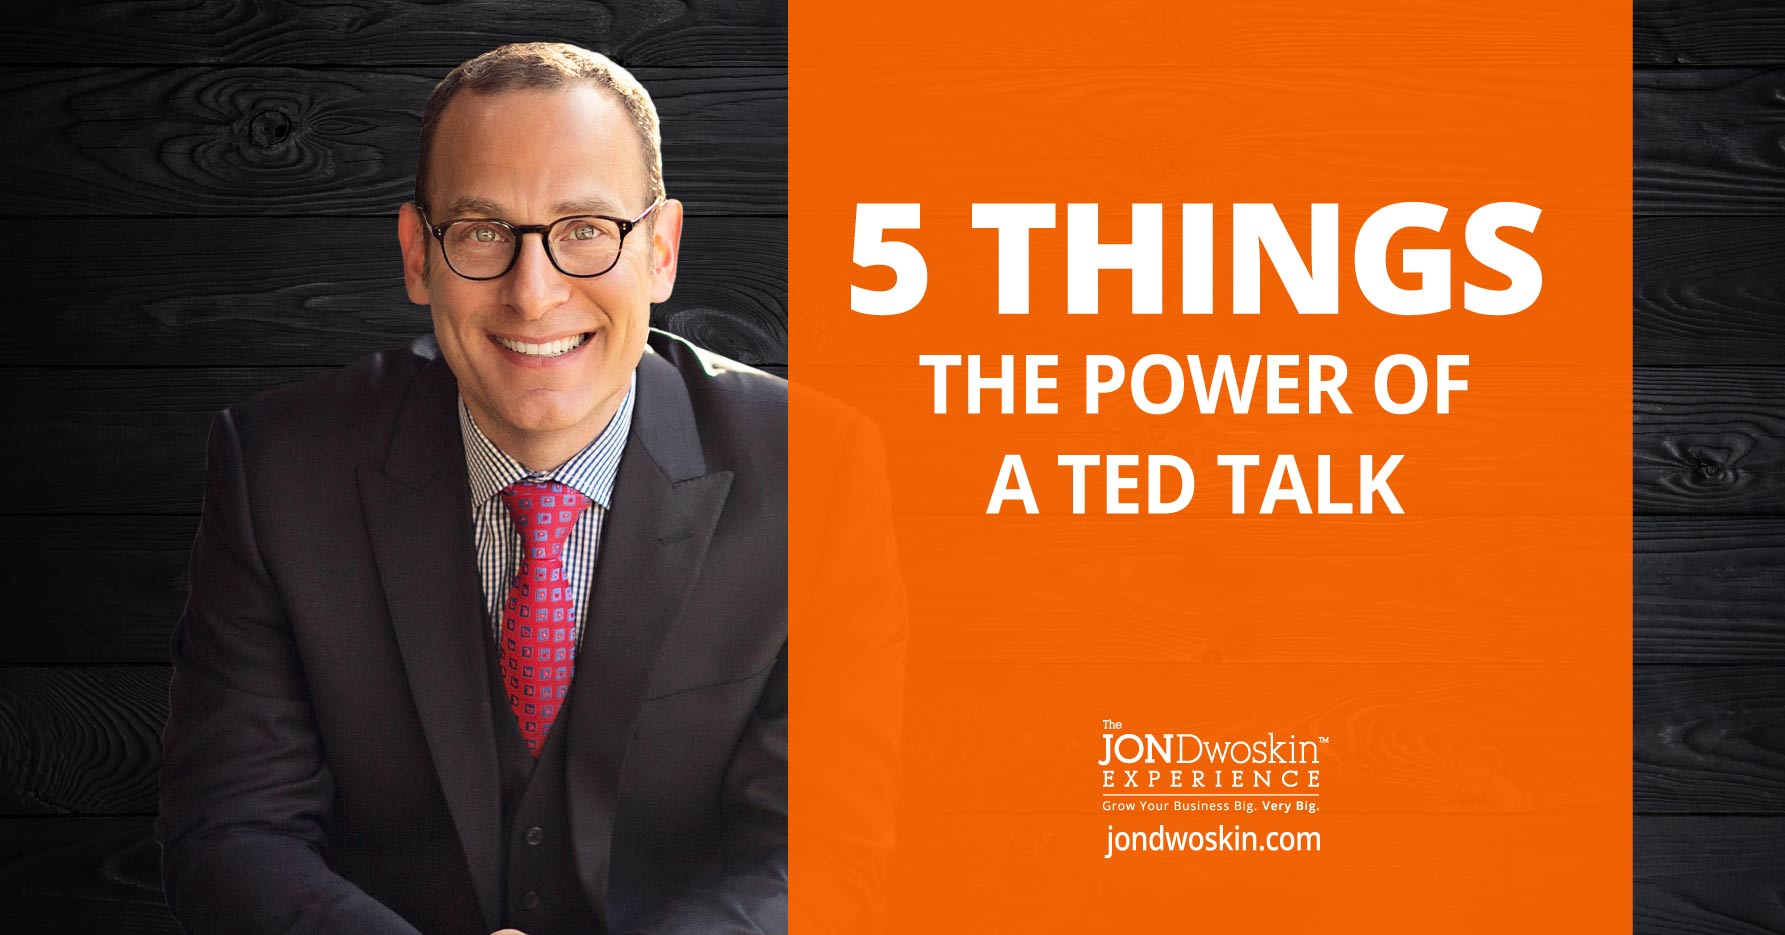 The Power of a TED Talk